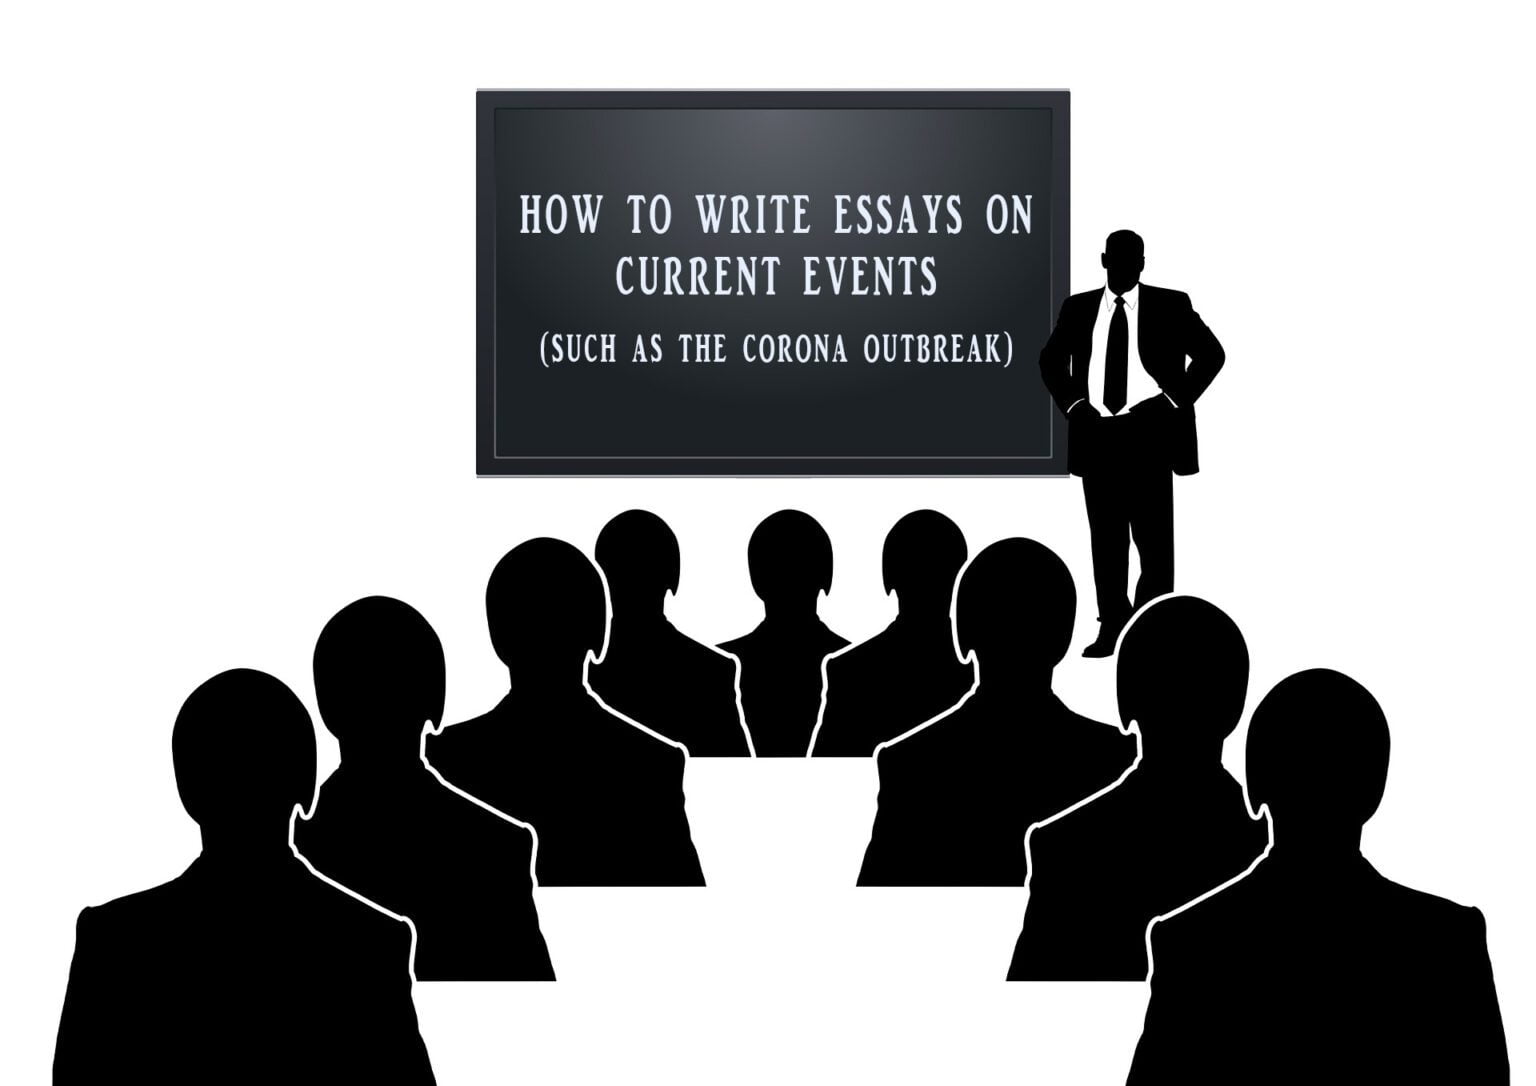 How to Write Essays on Current Events (Such as The Corona Outbreak)